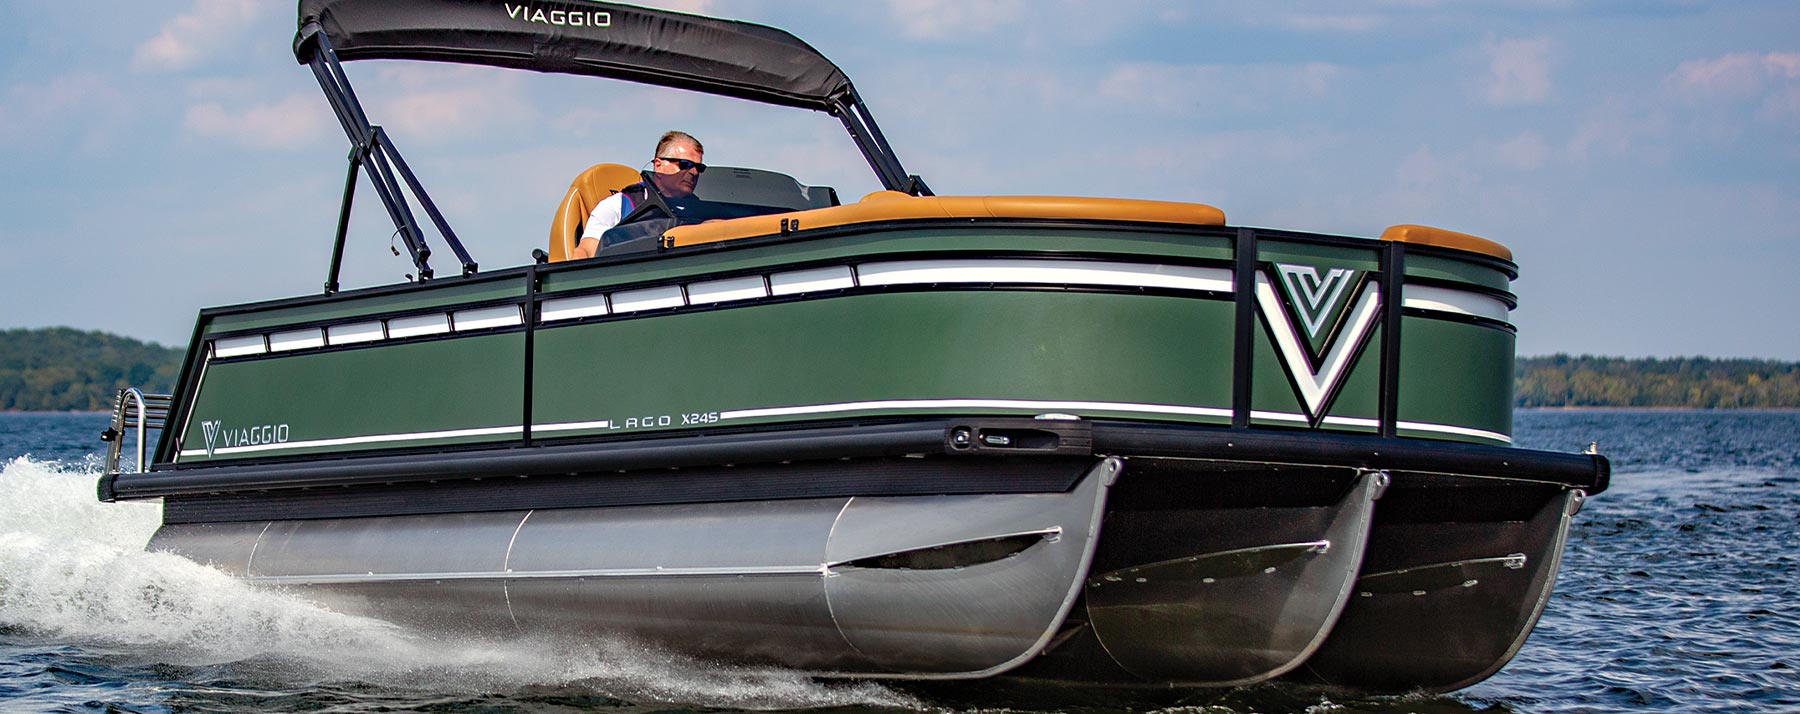 starboard side view of a man wearing sunglasses operating a green Viaggio Lago X24S on an enclosed body of water